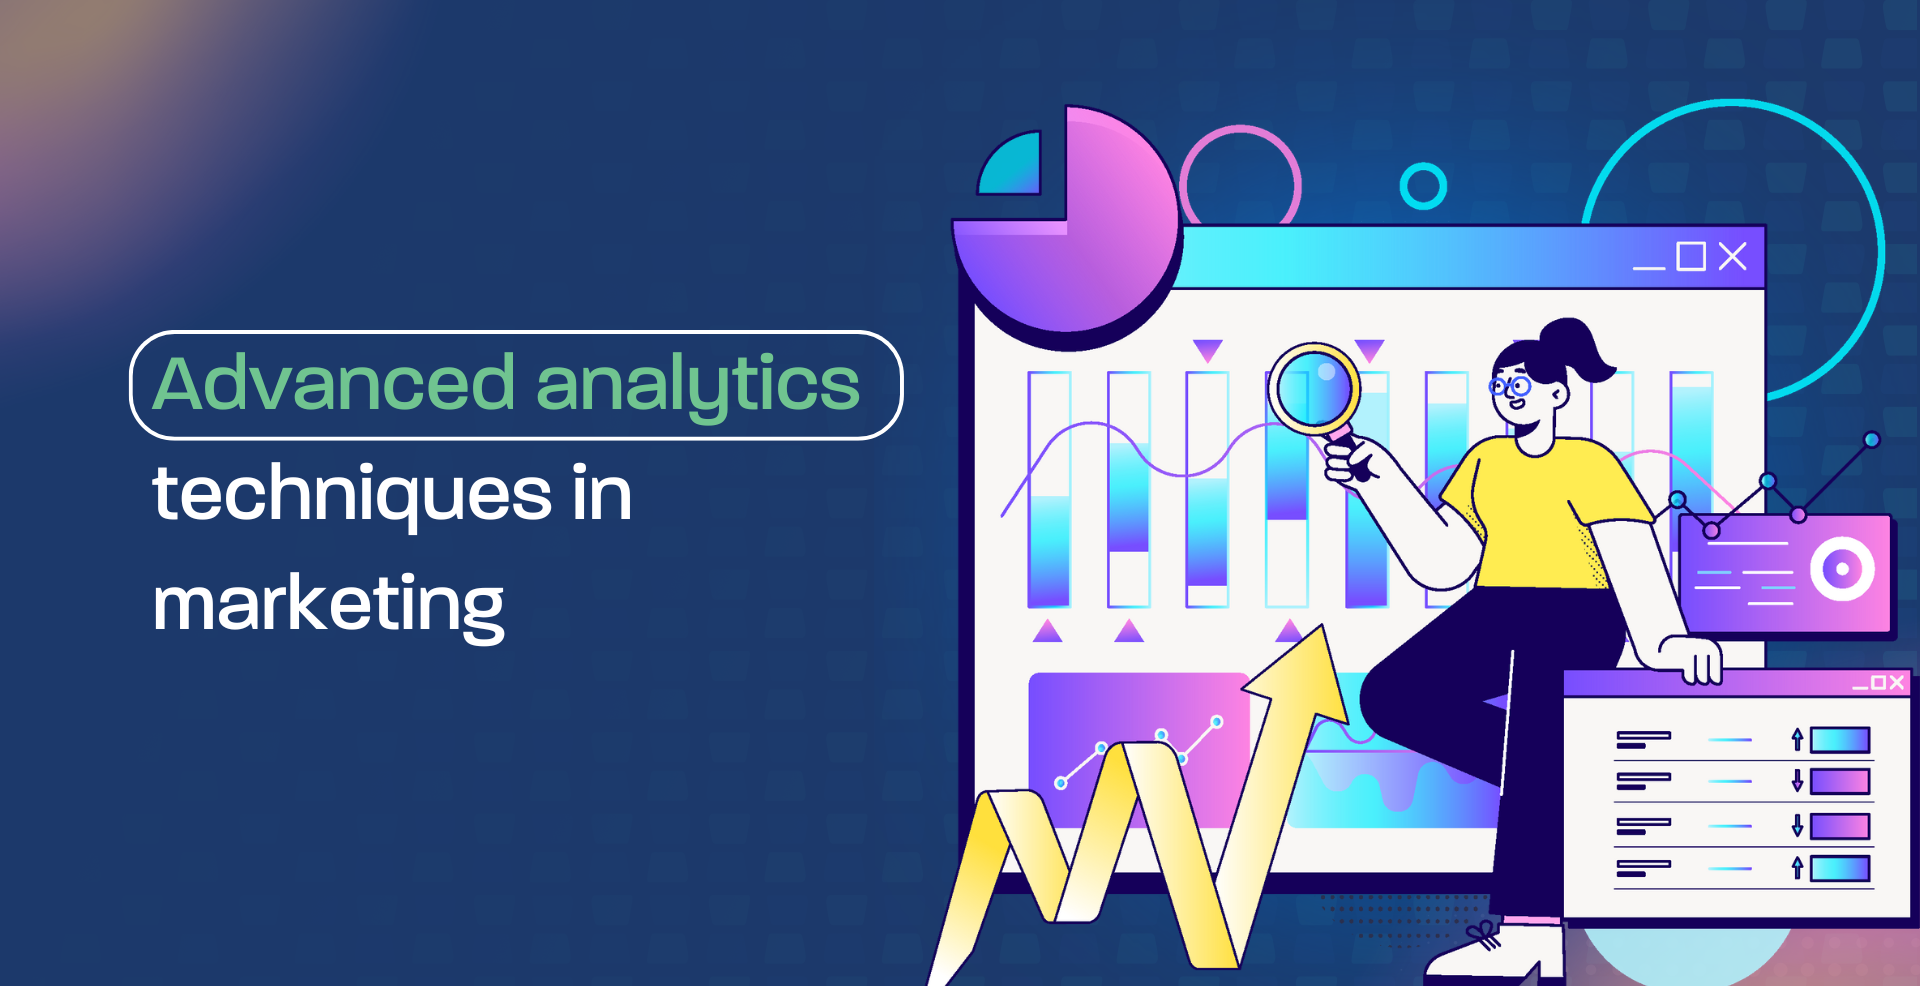 4 Advanced analytics techniques in marketing